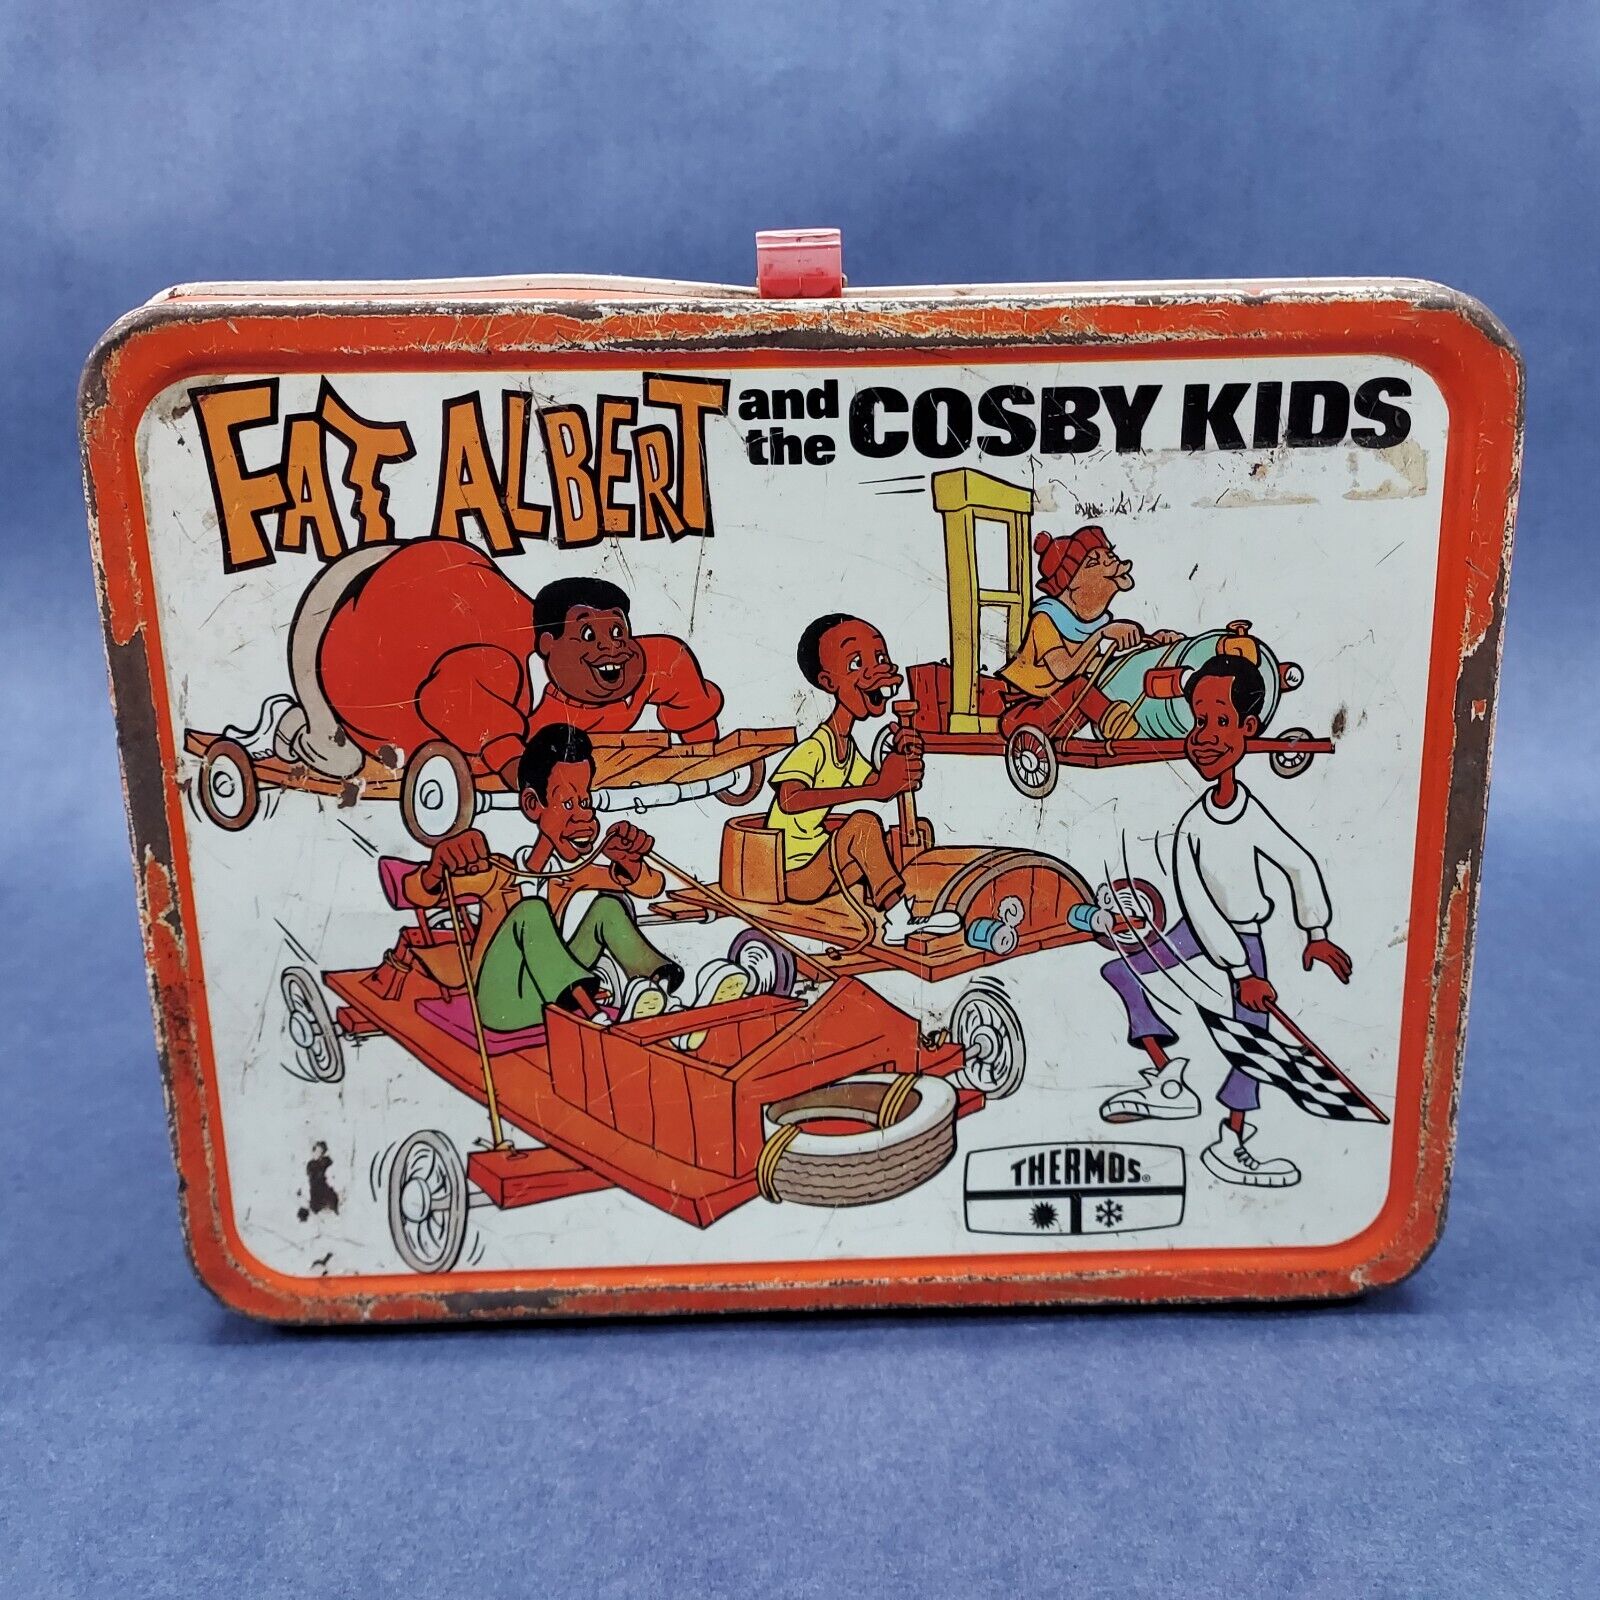 Vintage Damaged 1973 Thermos Fat Albert and the Cosby Kids Lunchbox  No Thermos